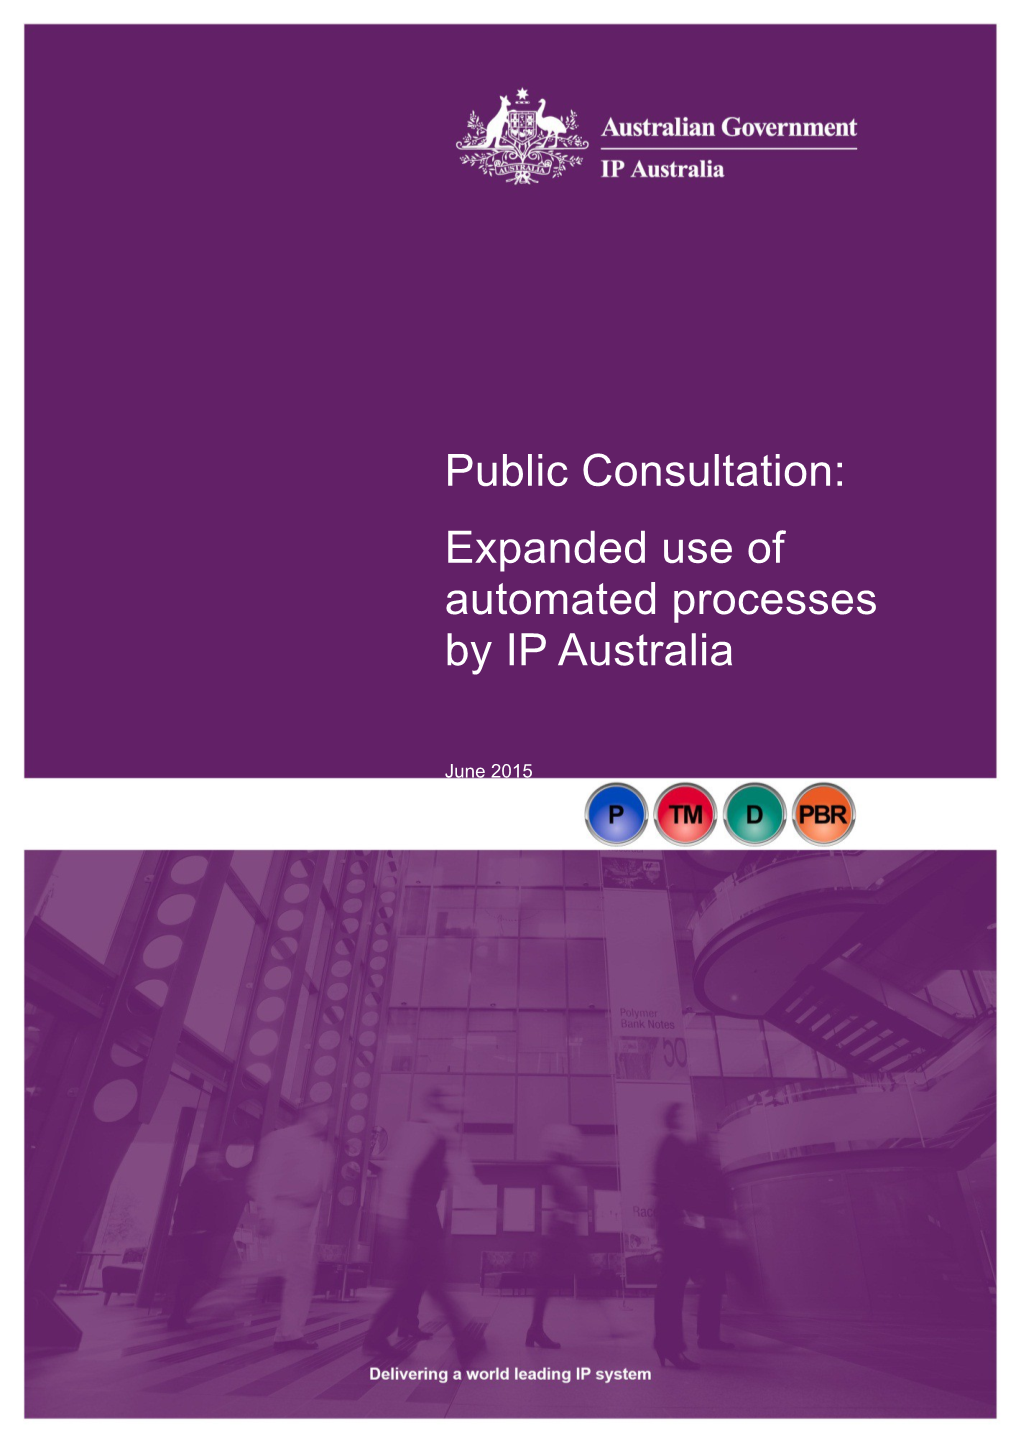 Public Consultation: Proposals to Streamline IP Processes and Support Small Business